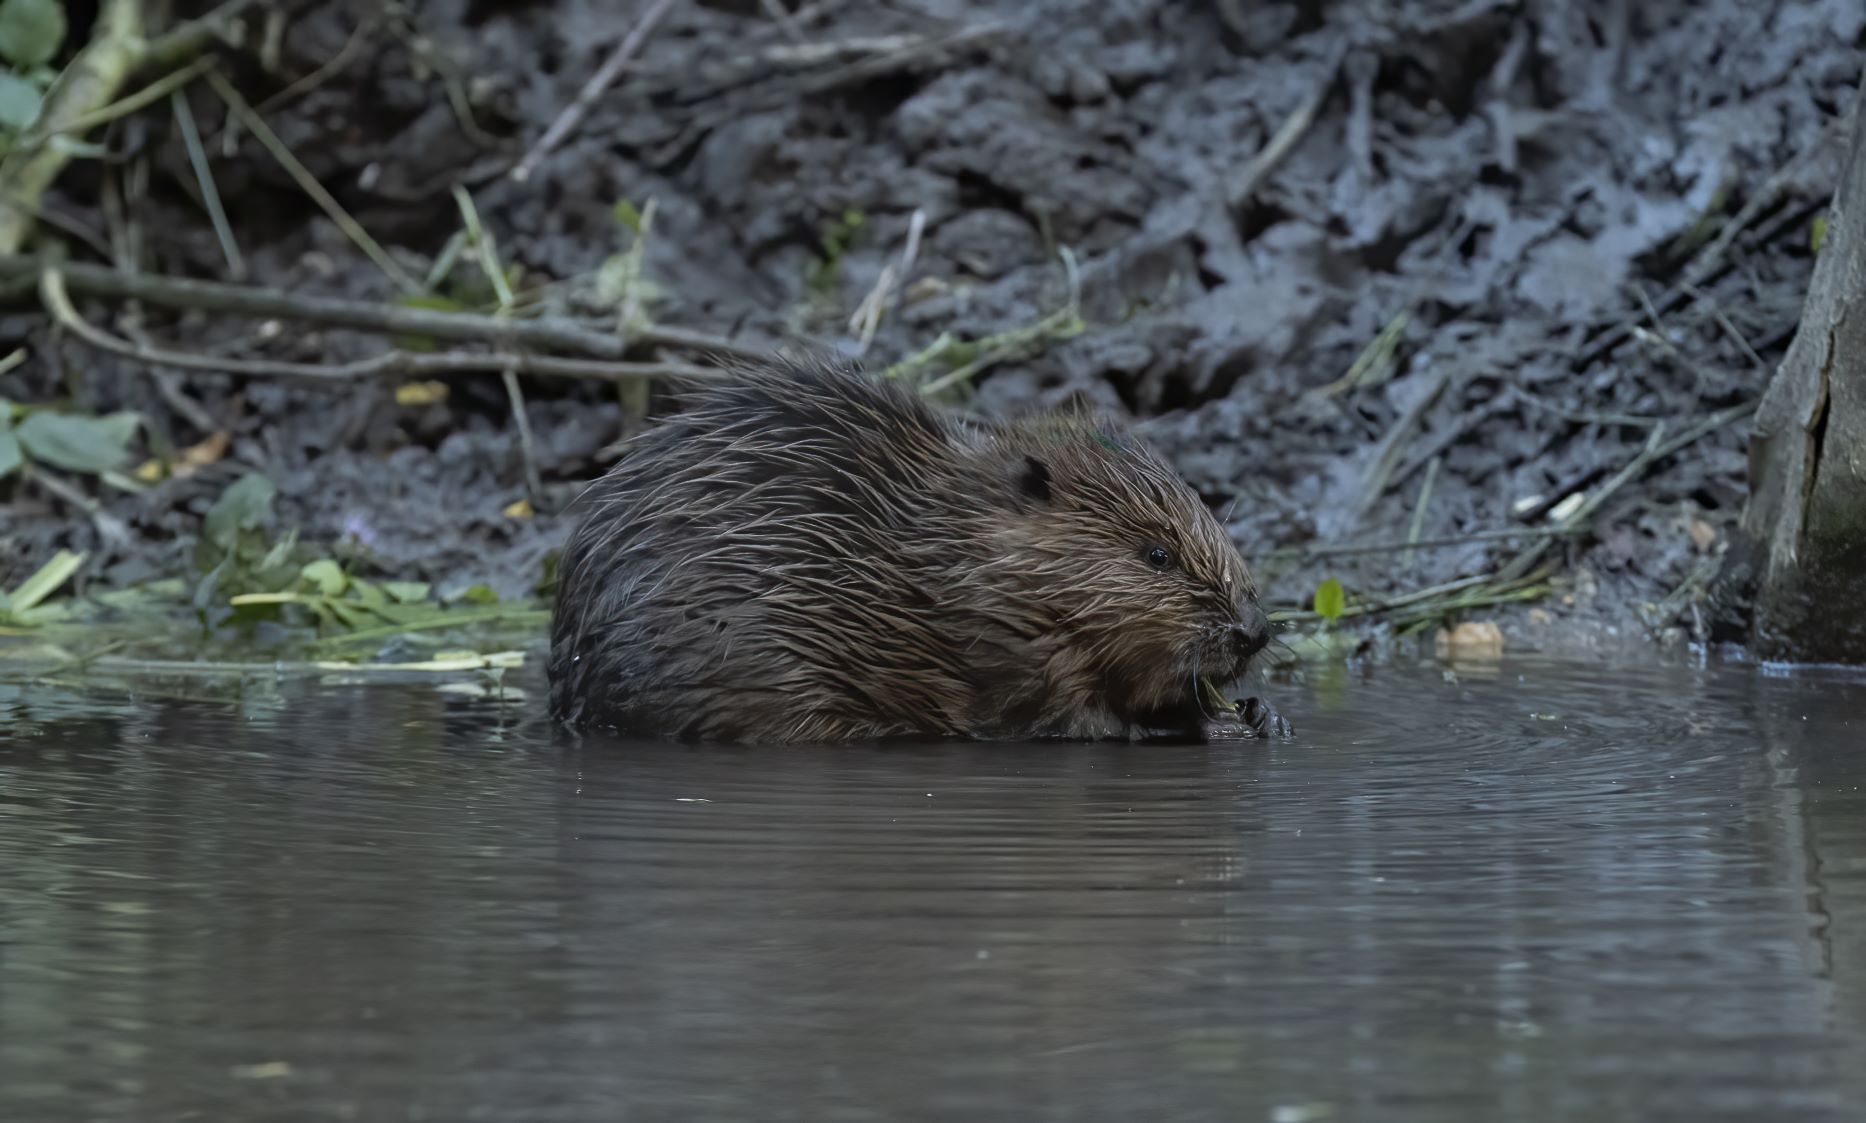 Beaver kit (baby beaver) eating in front of its lodge at Spains Hall estate (Credit Russell Savory)